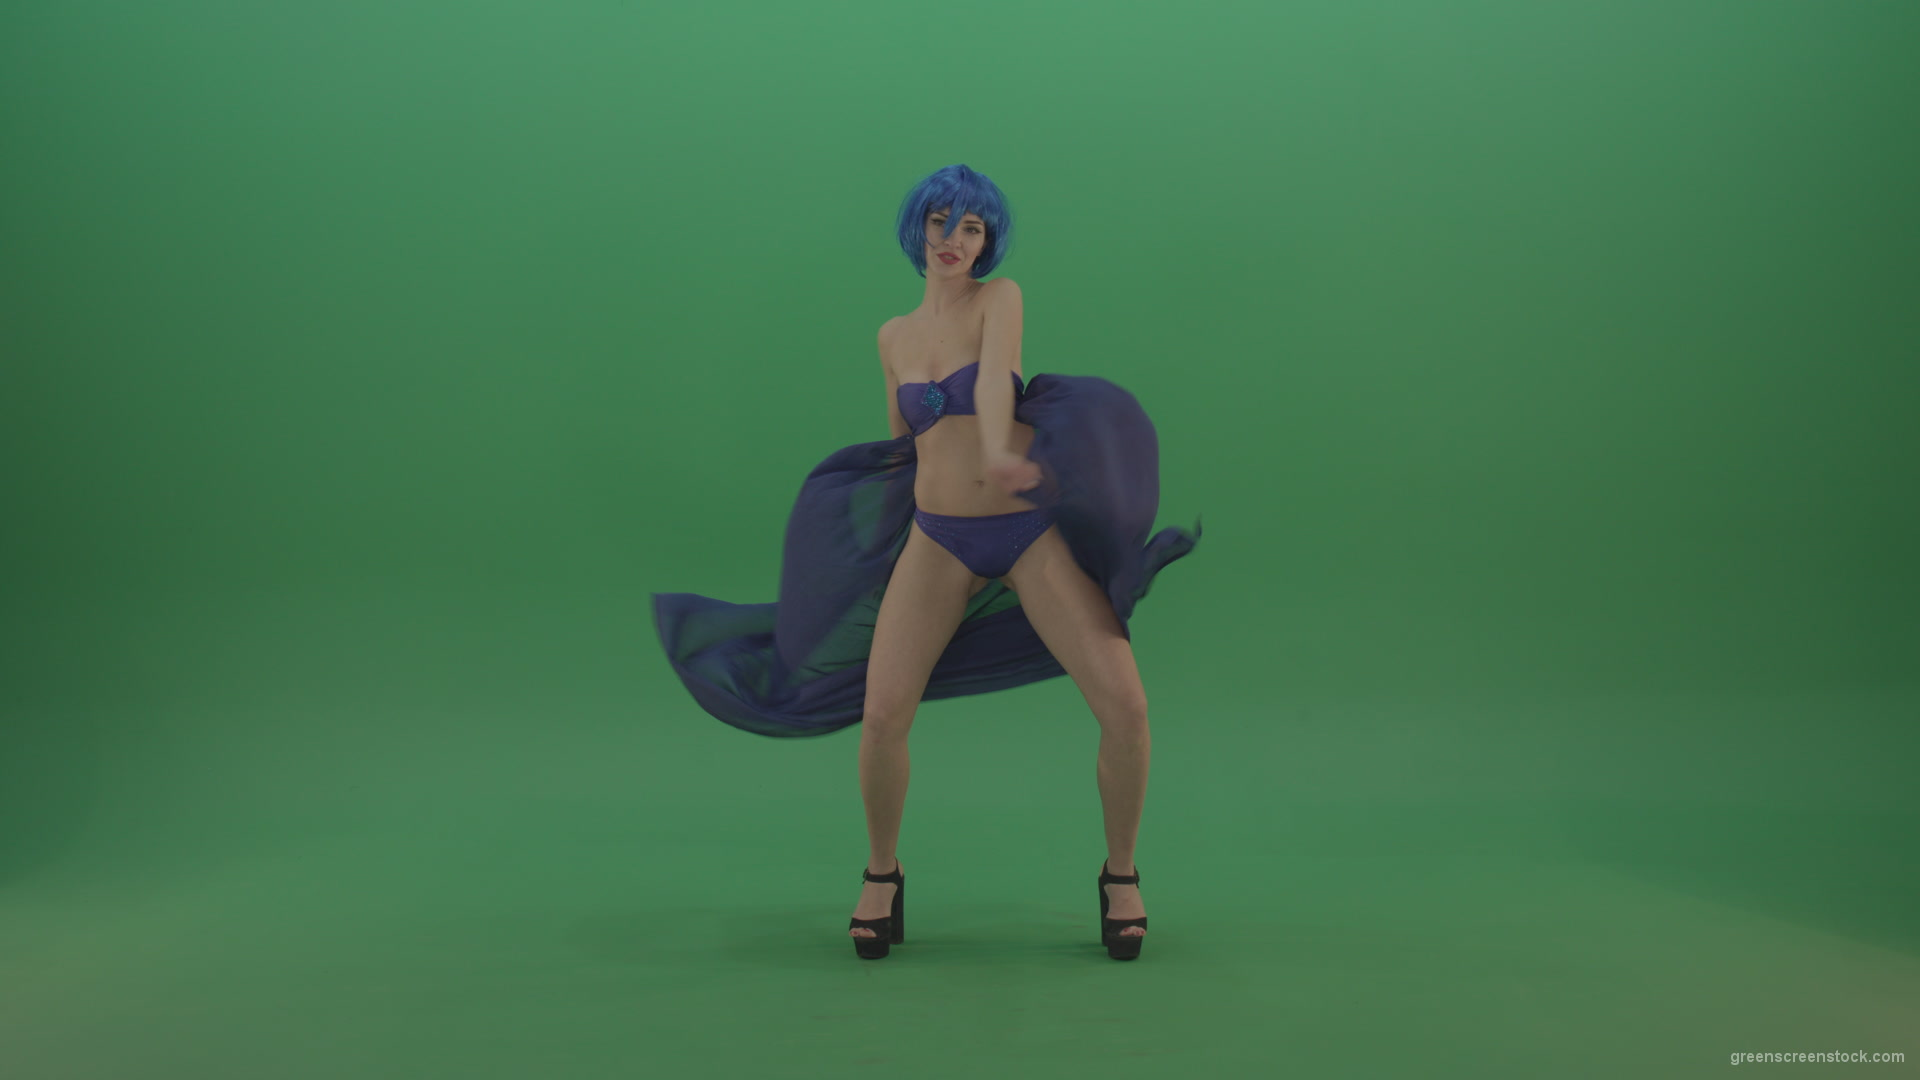 Full-size-erotic-young-girl-dancing-go-go-with-blue-dress-curtain-on-green-screen-1_006 Green Screen Stock